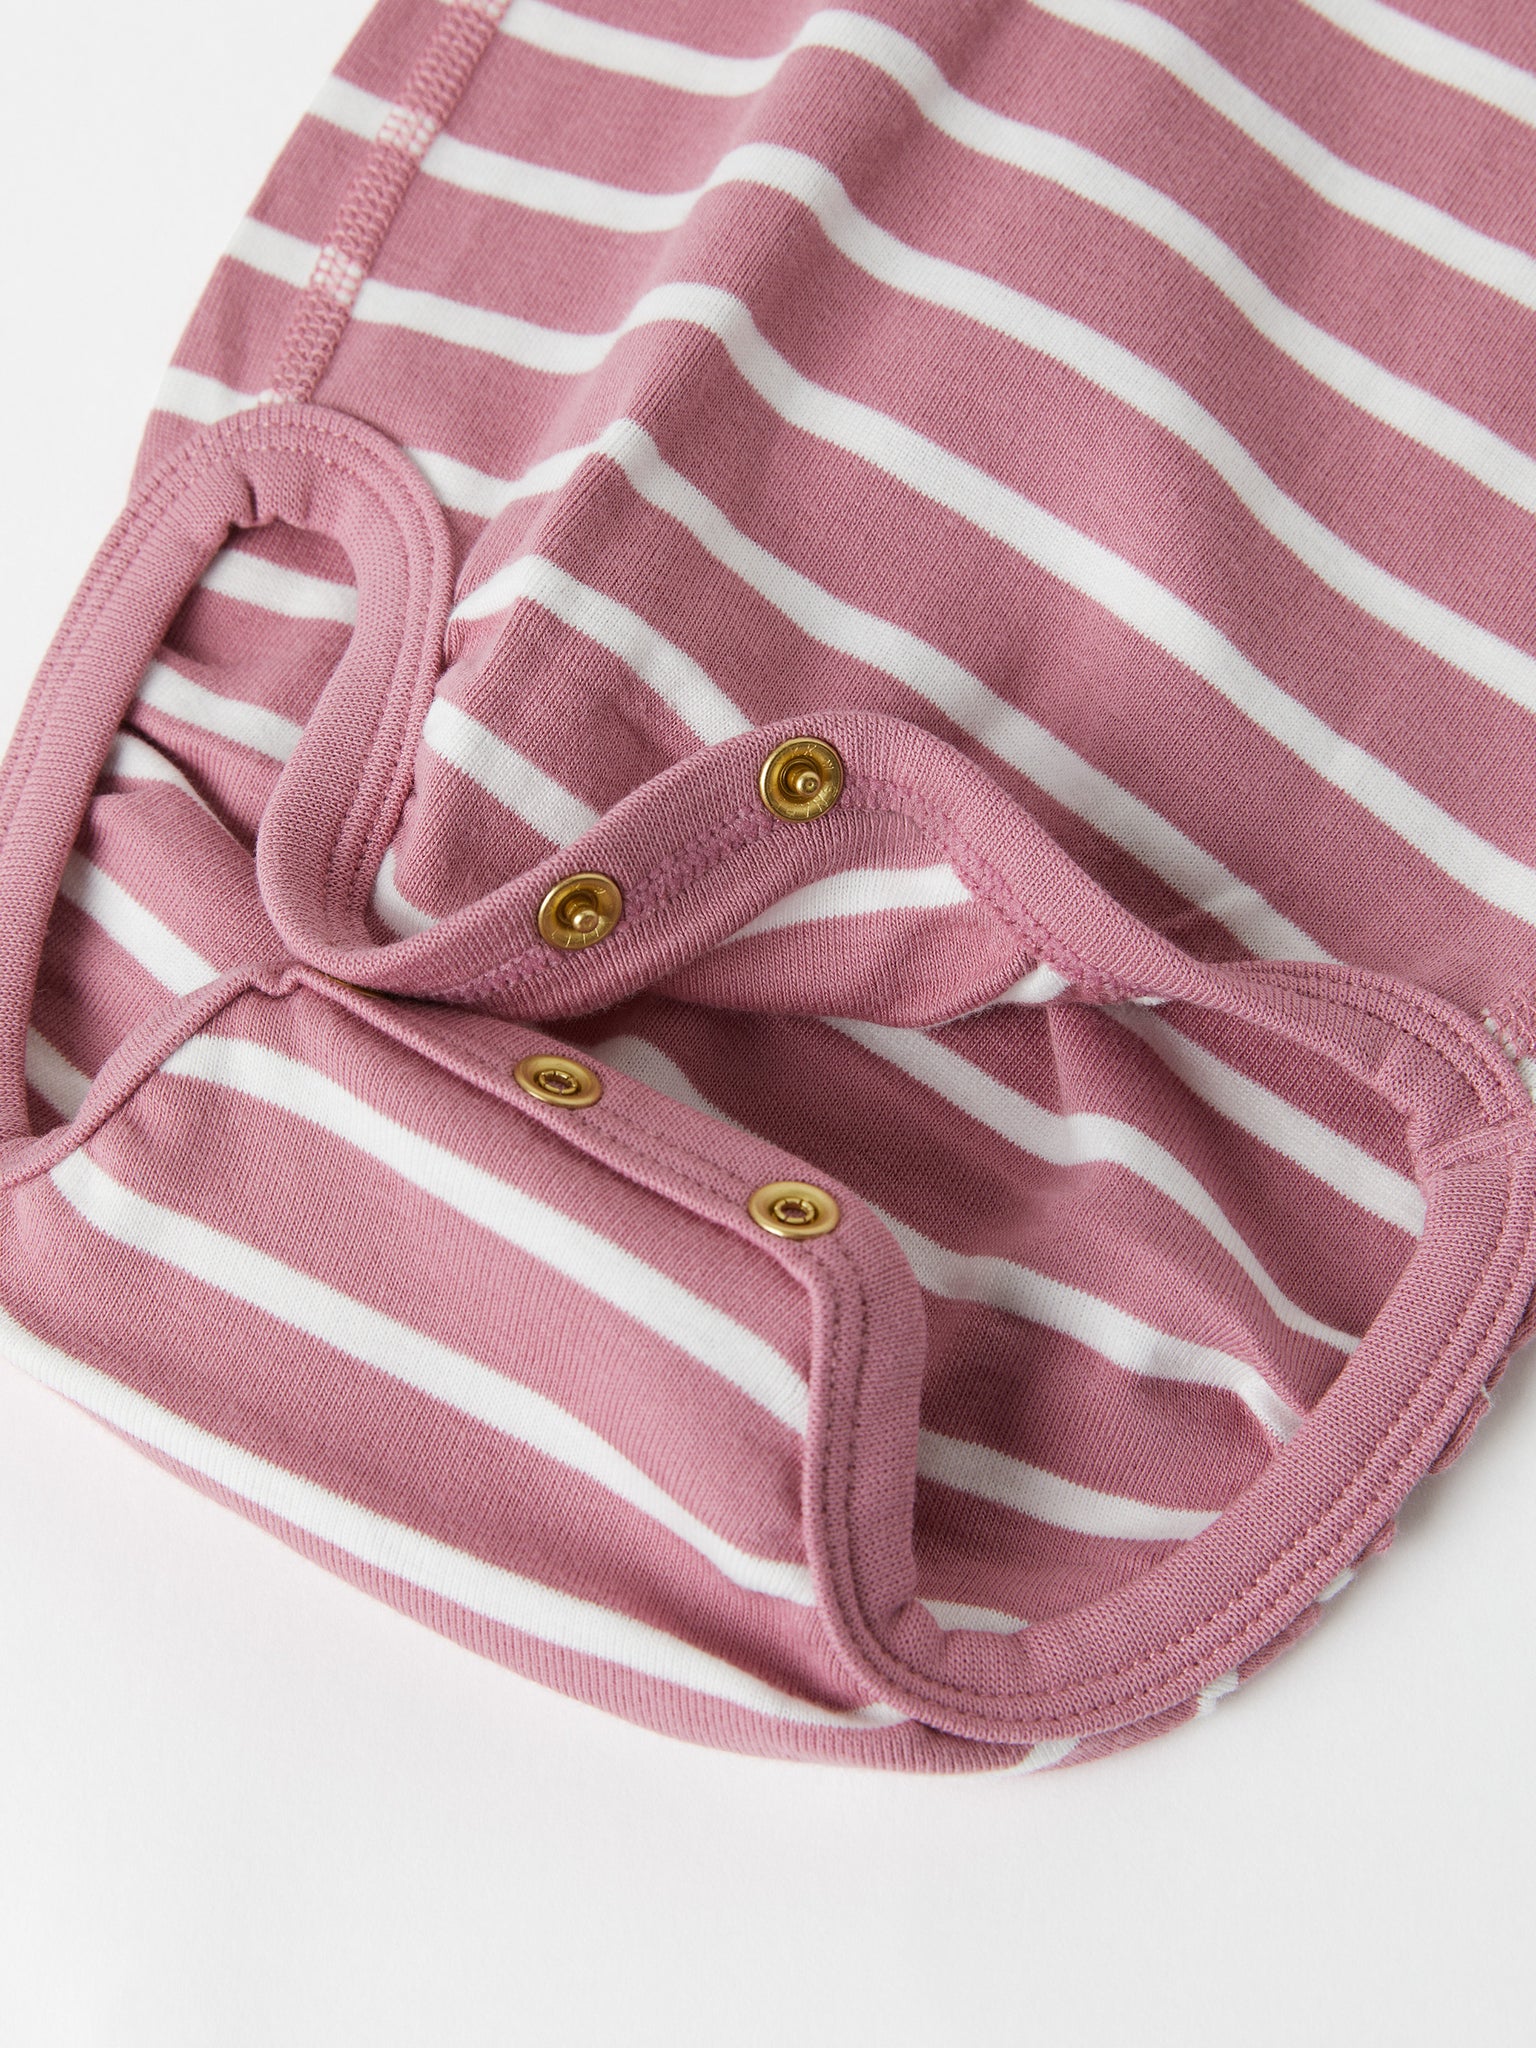 Organic Cotton Pink Babygrow from the Polarn O. Pyret baby collection. Made using 100% GOTS Organic Cotton